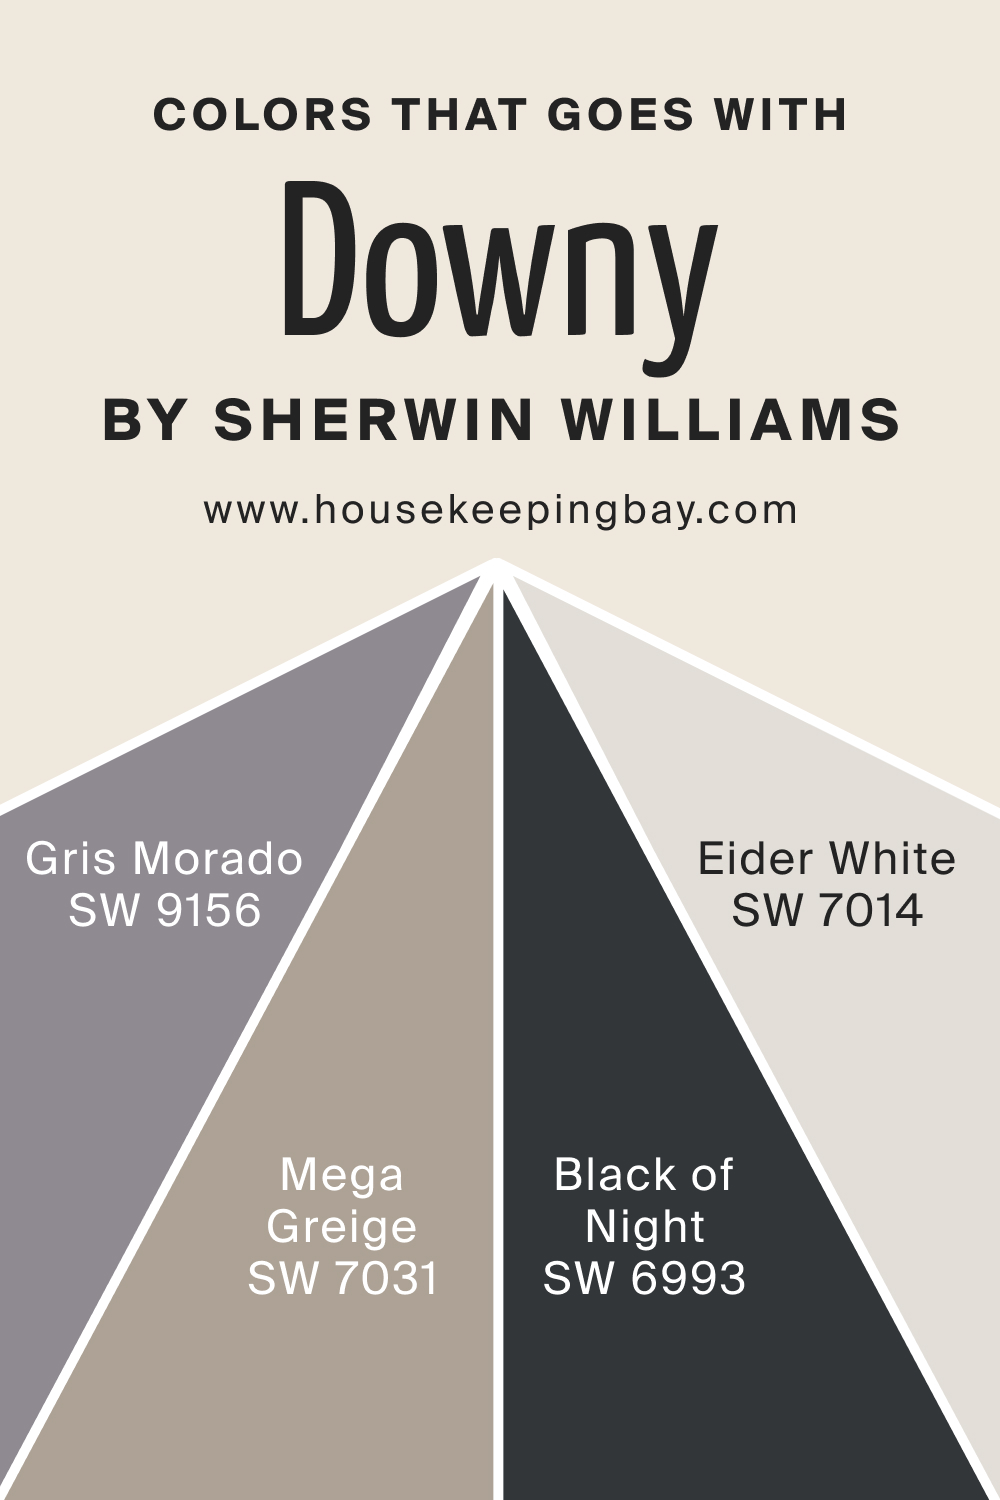 Colors that goes with SW Downy by Sherwin Williams